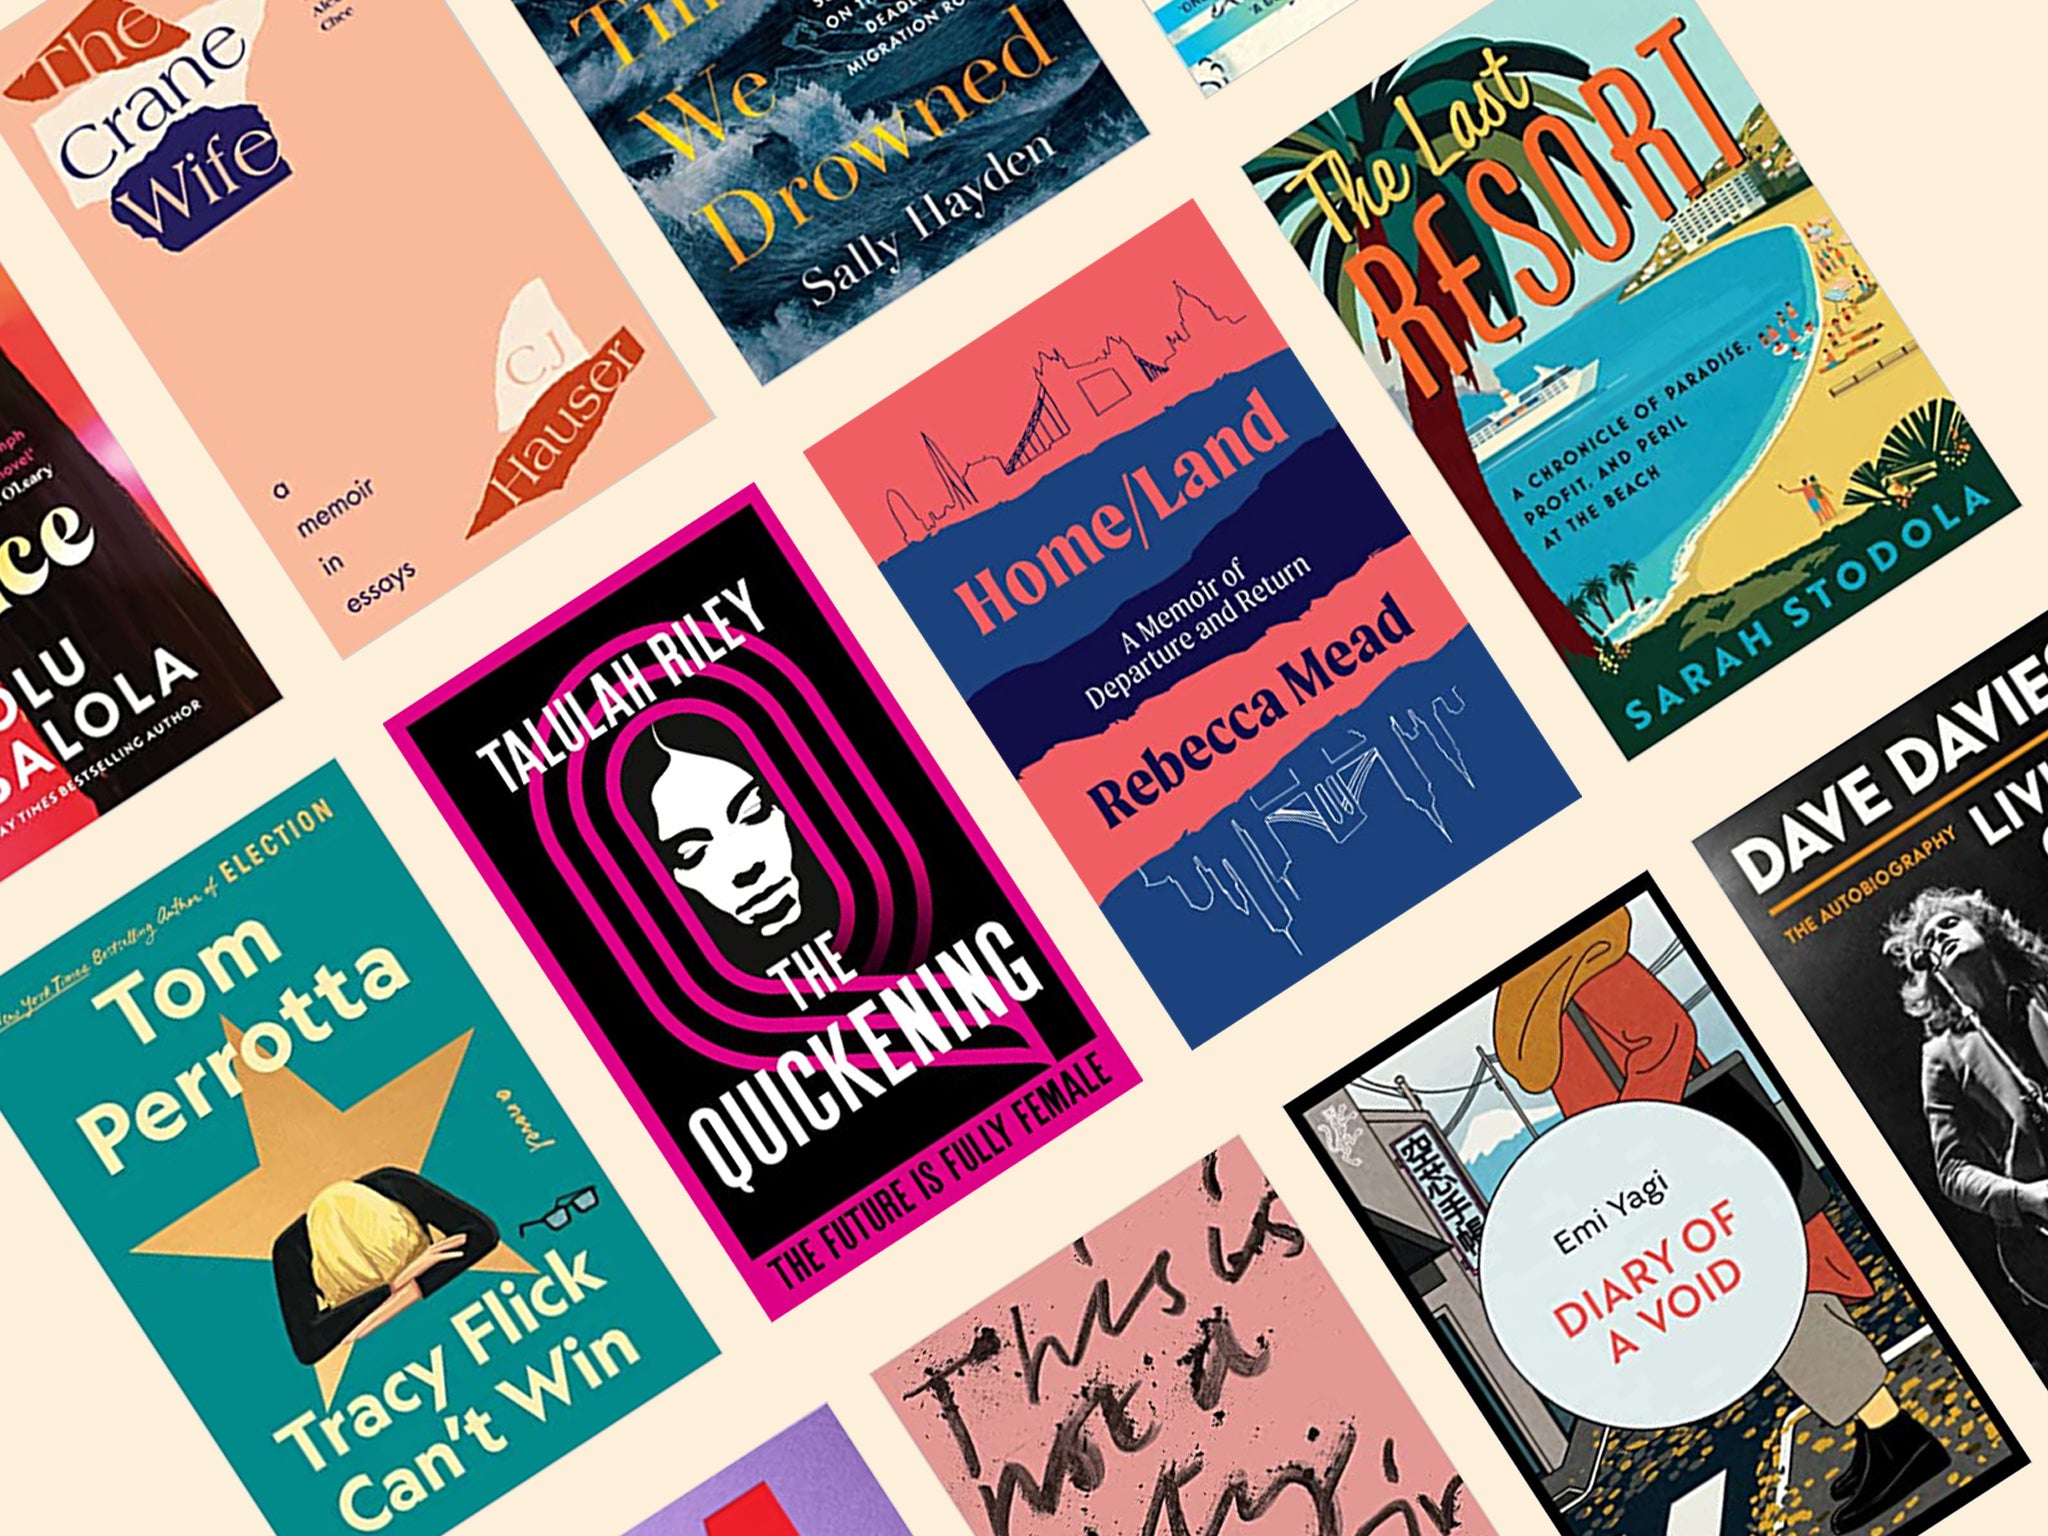 From dystopian realities to medieval fiefdoms and a world of romance, these books will transport you